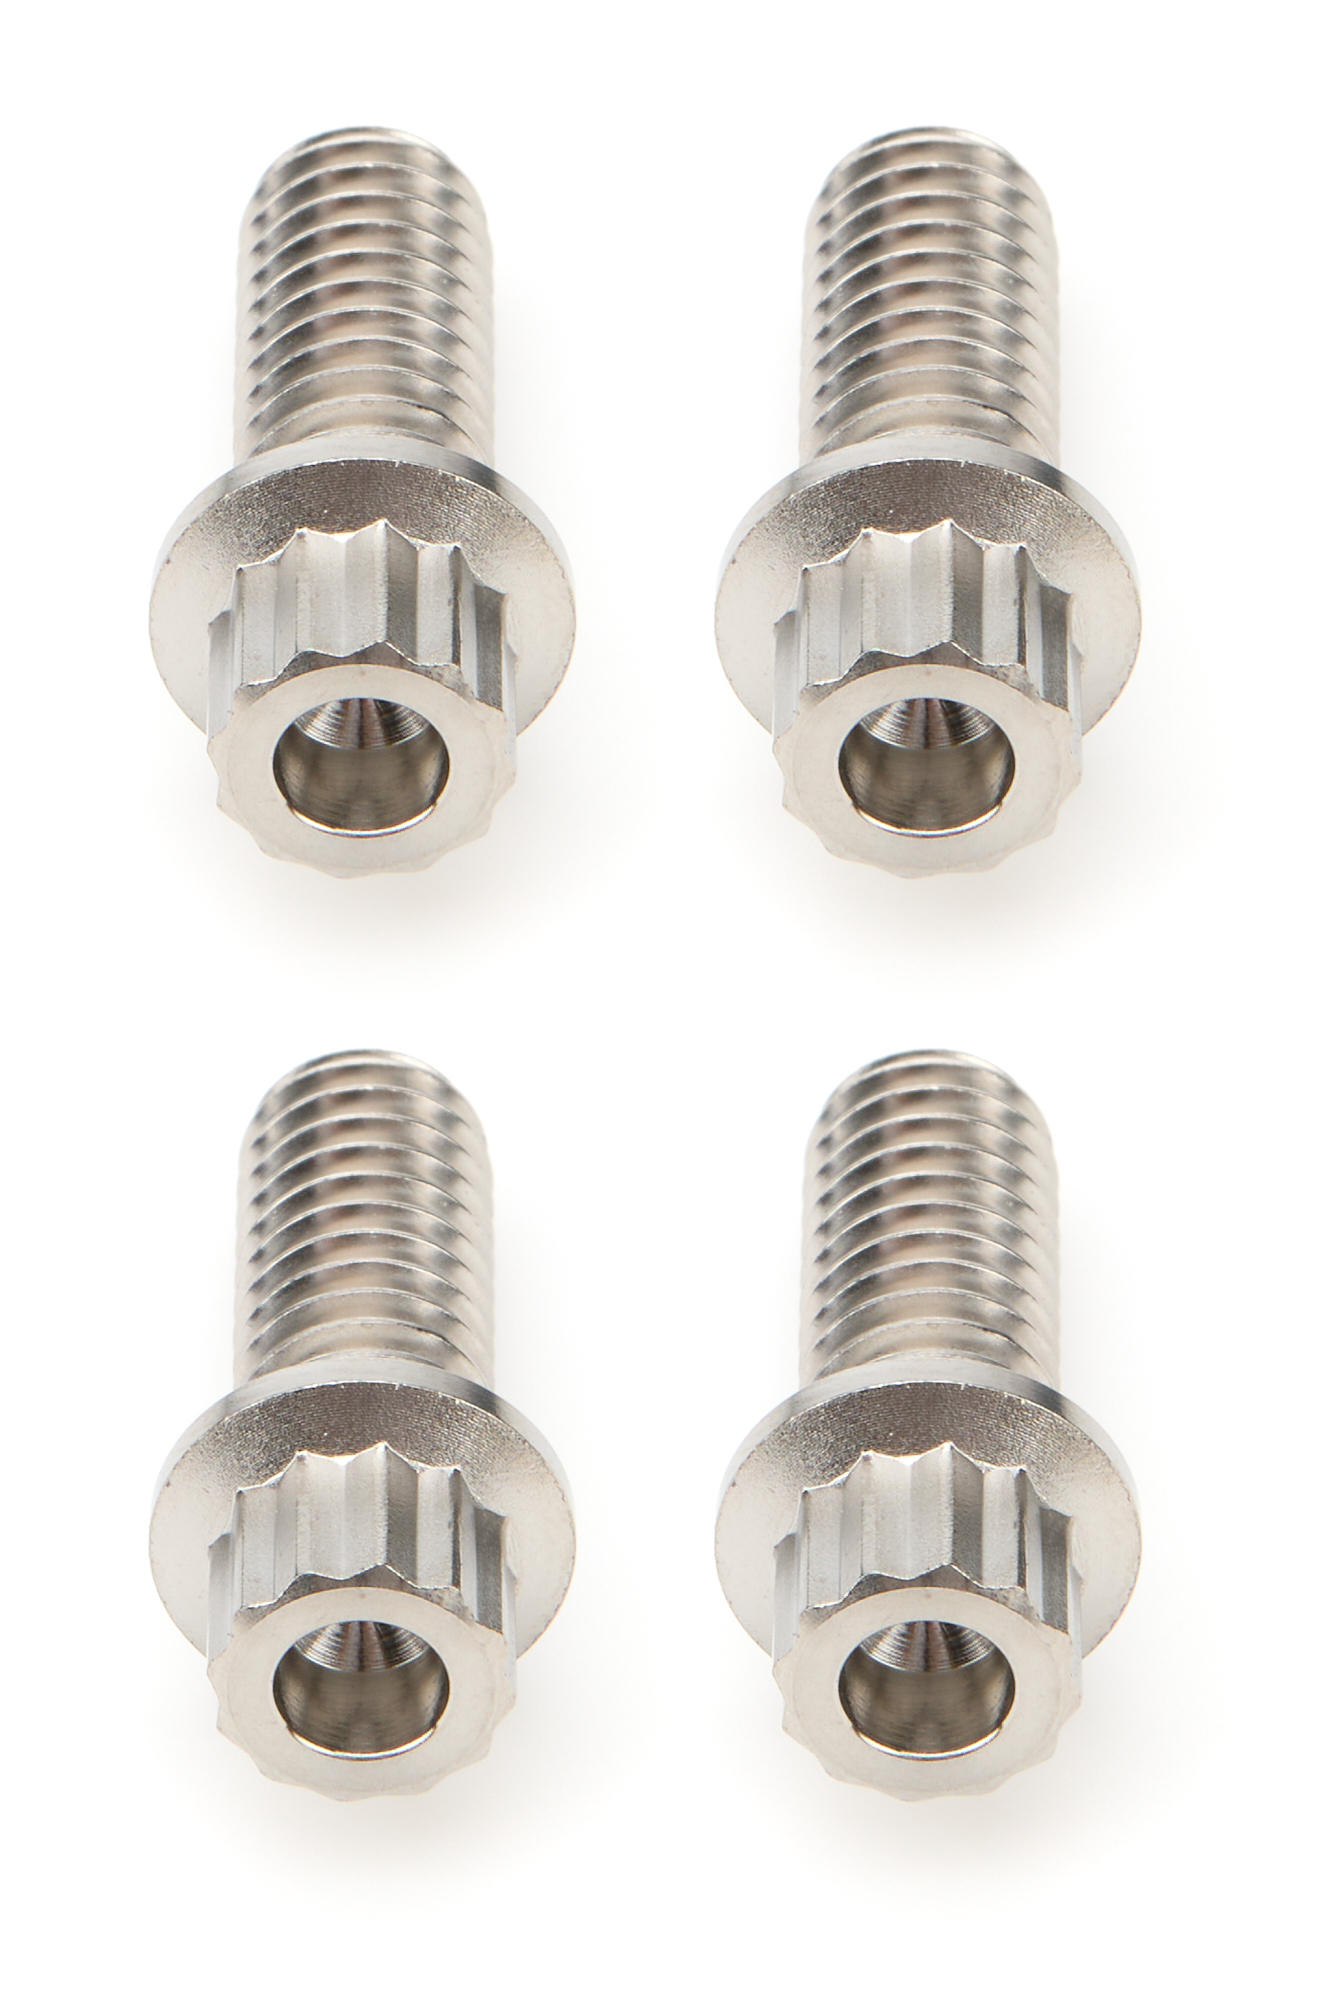 Ti22 Performance 1215 Fuel Tank Bolt, 5/16-18 in Thread, 0.750 in Long, 12-Point Head, Titanium, Natural, Set of 4